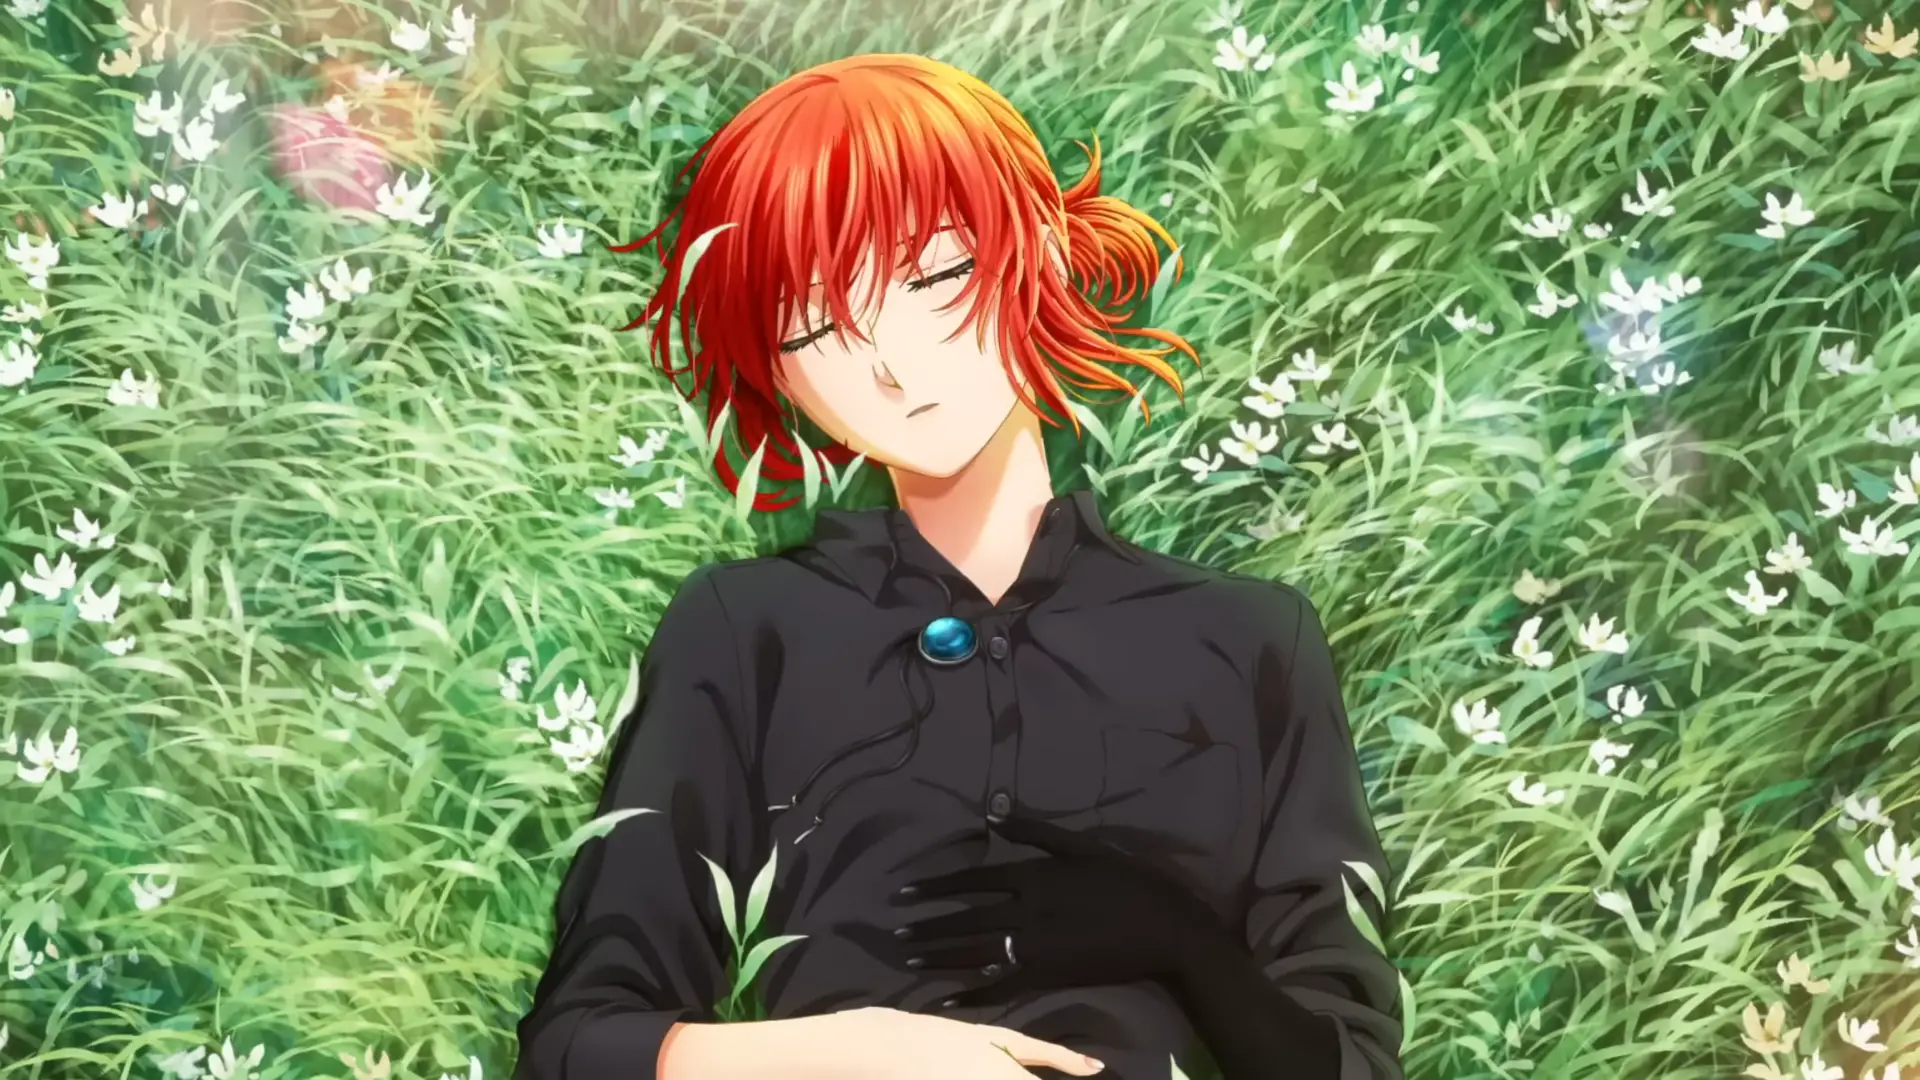 A still from The Ancient Magus' Bride featuring Chise Hatori